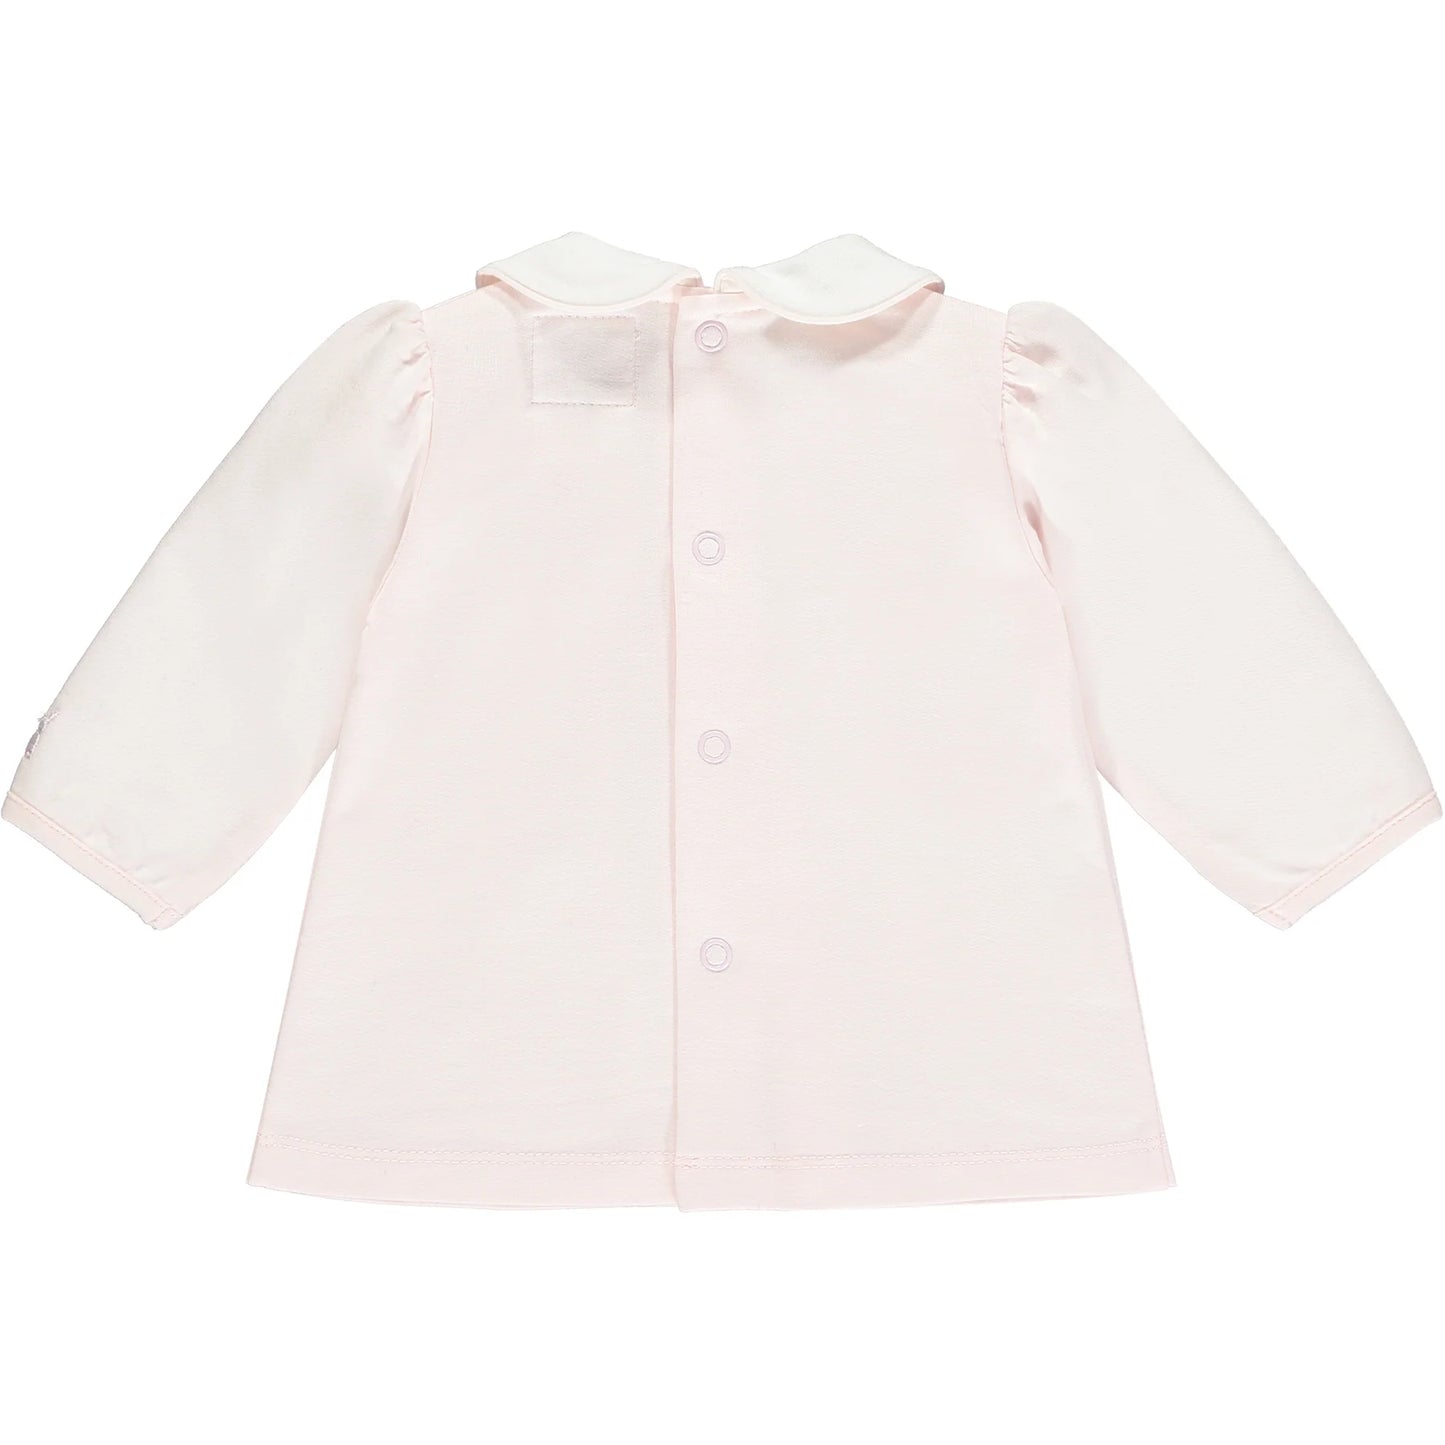 Emile et Rose Baby Girl's Pale Pink Embroidered Top & Trouser Set